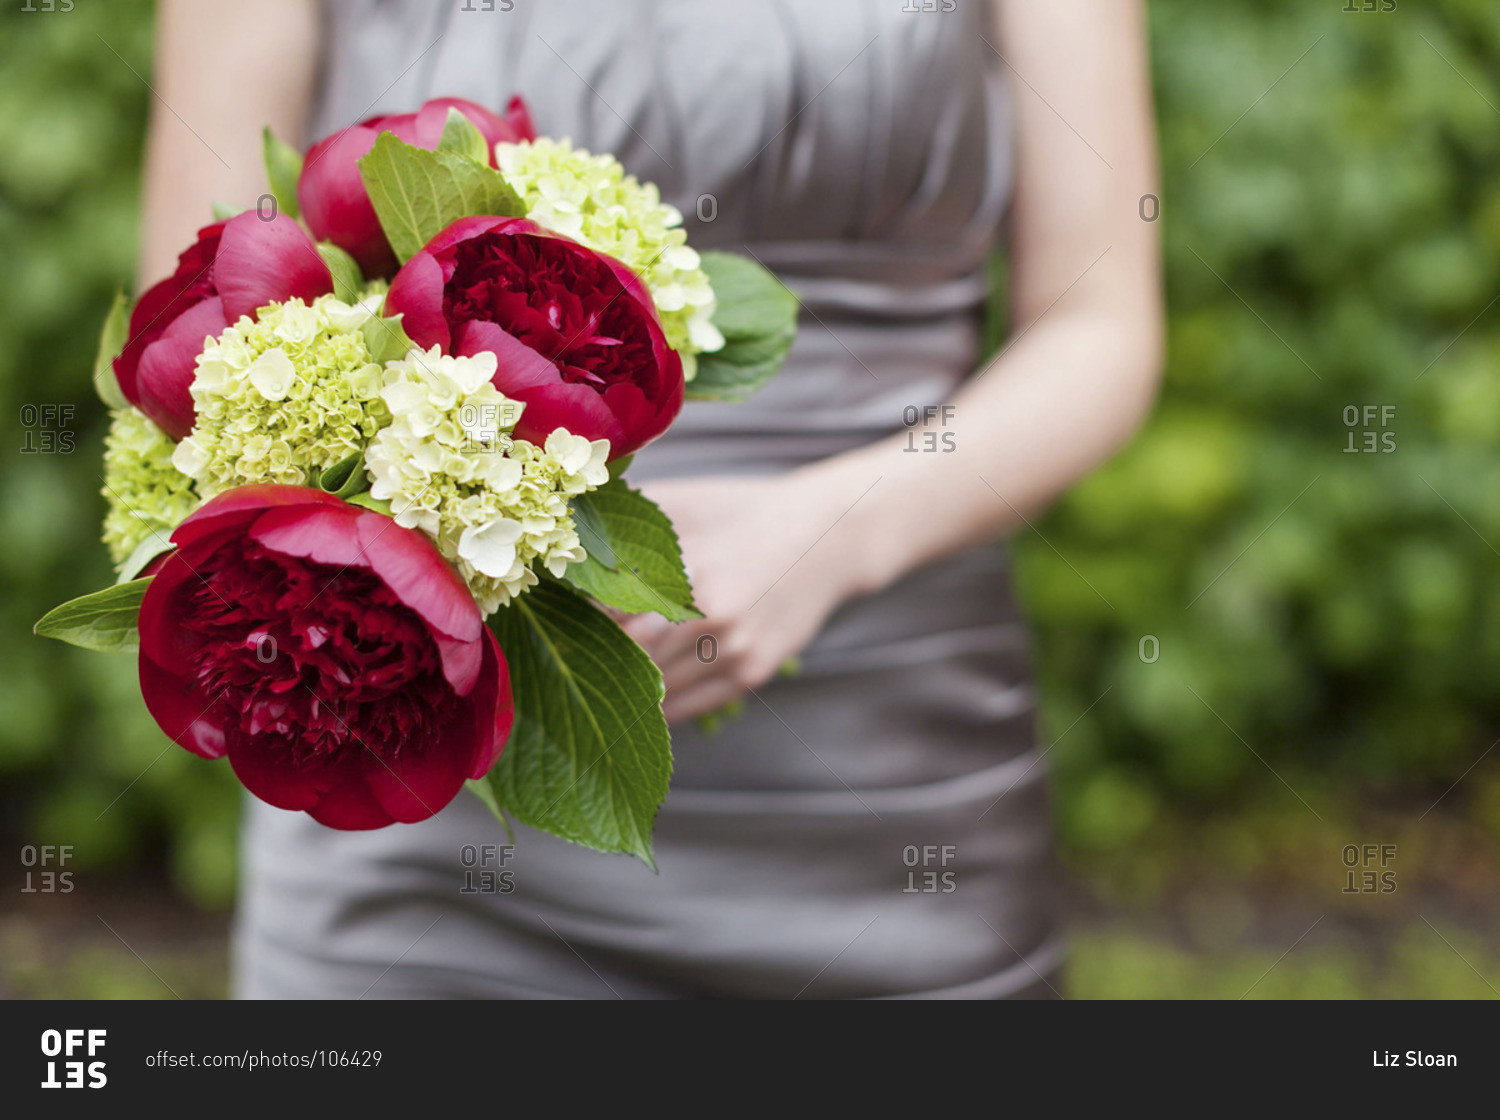 Mid section view of bridesmaid holding a burgundy red peony bouquet